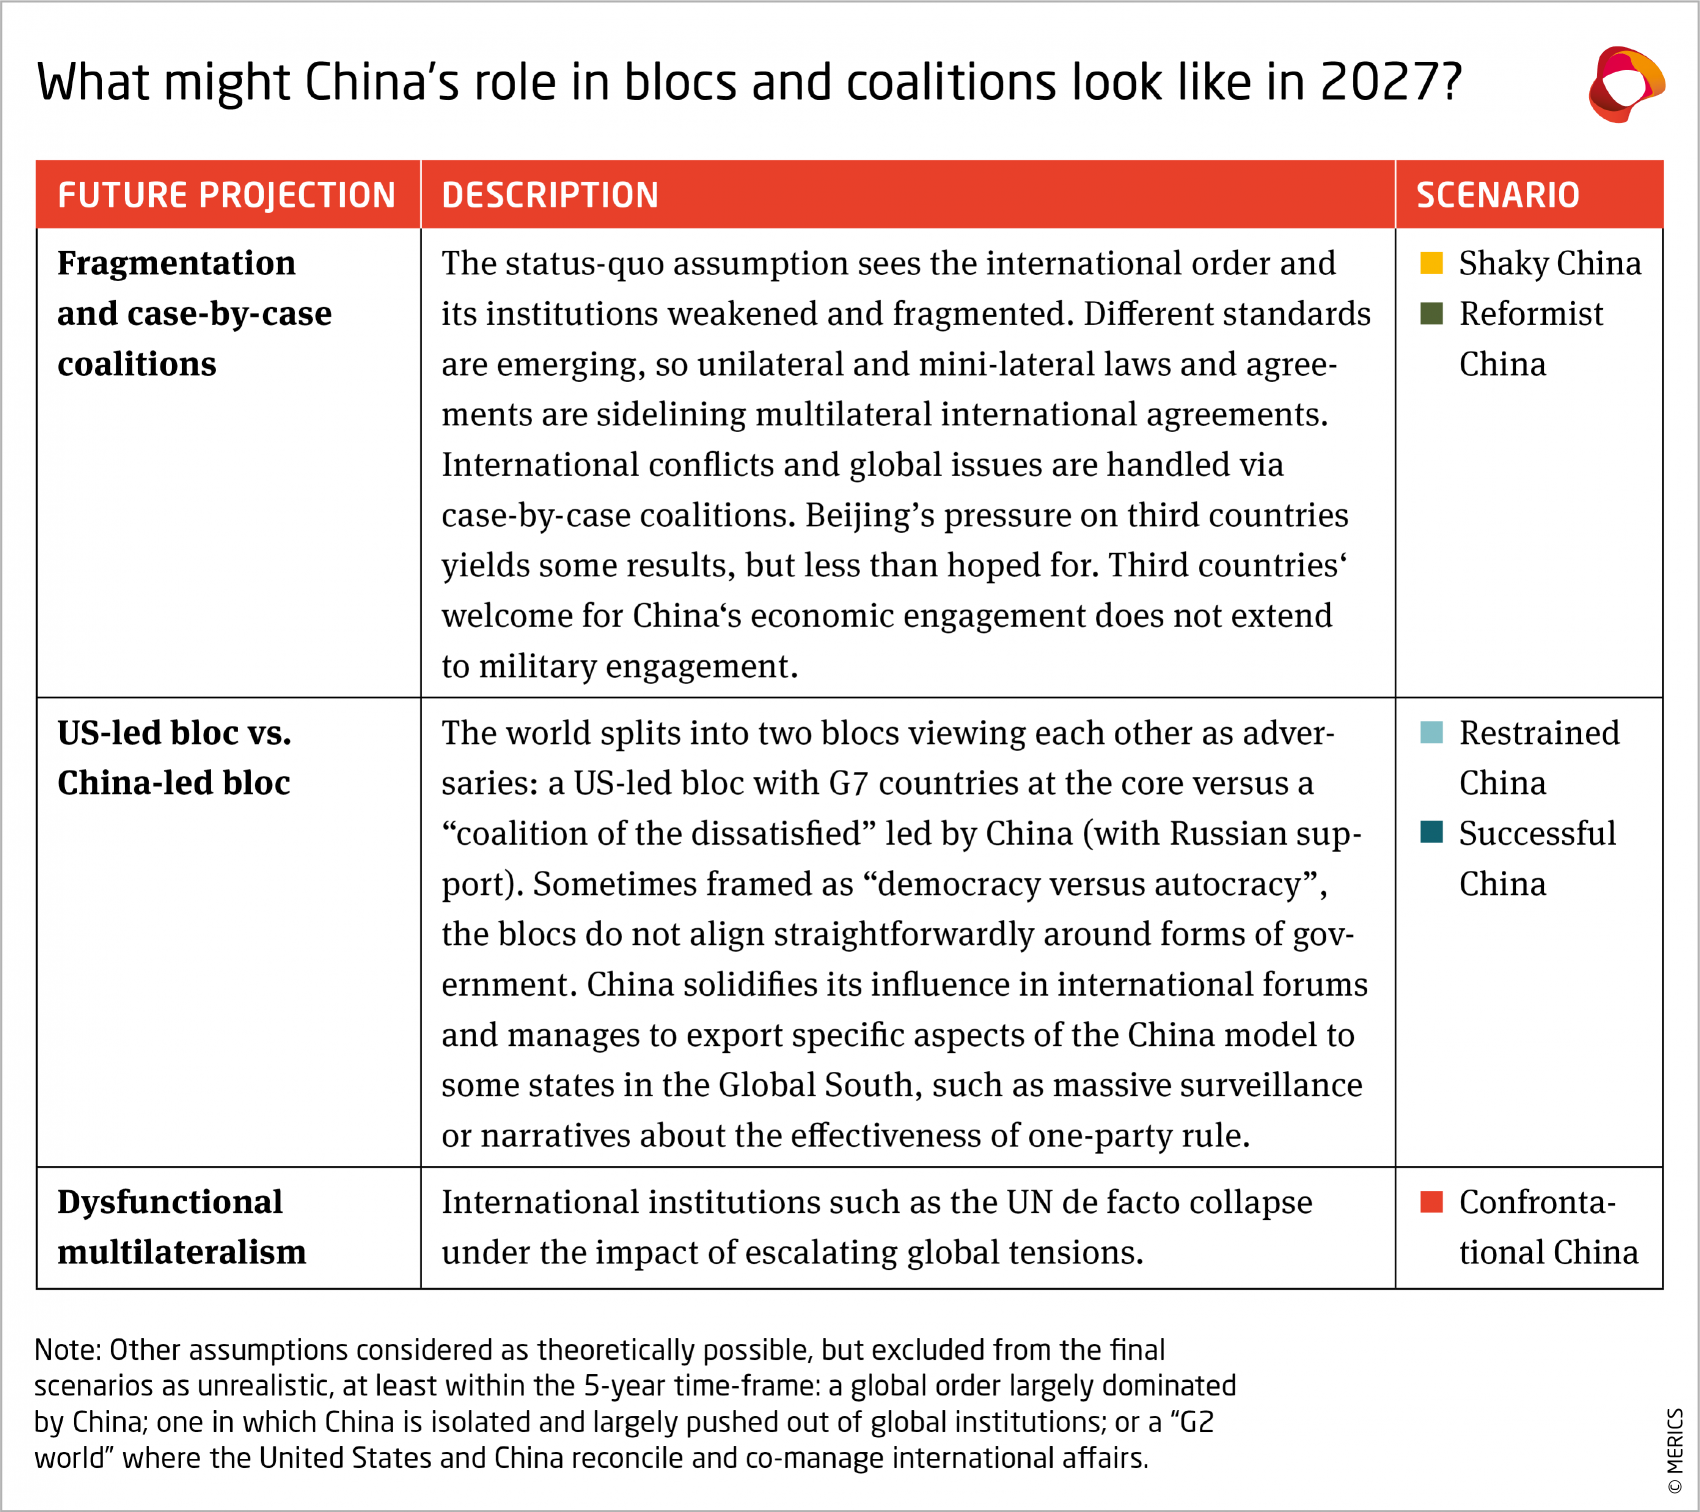 China's role in blocs and coalitions in 2027